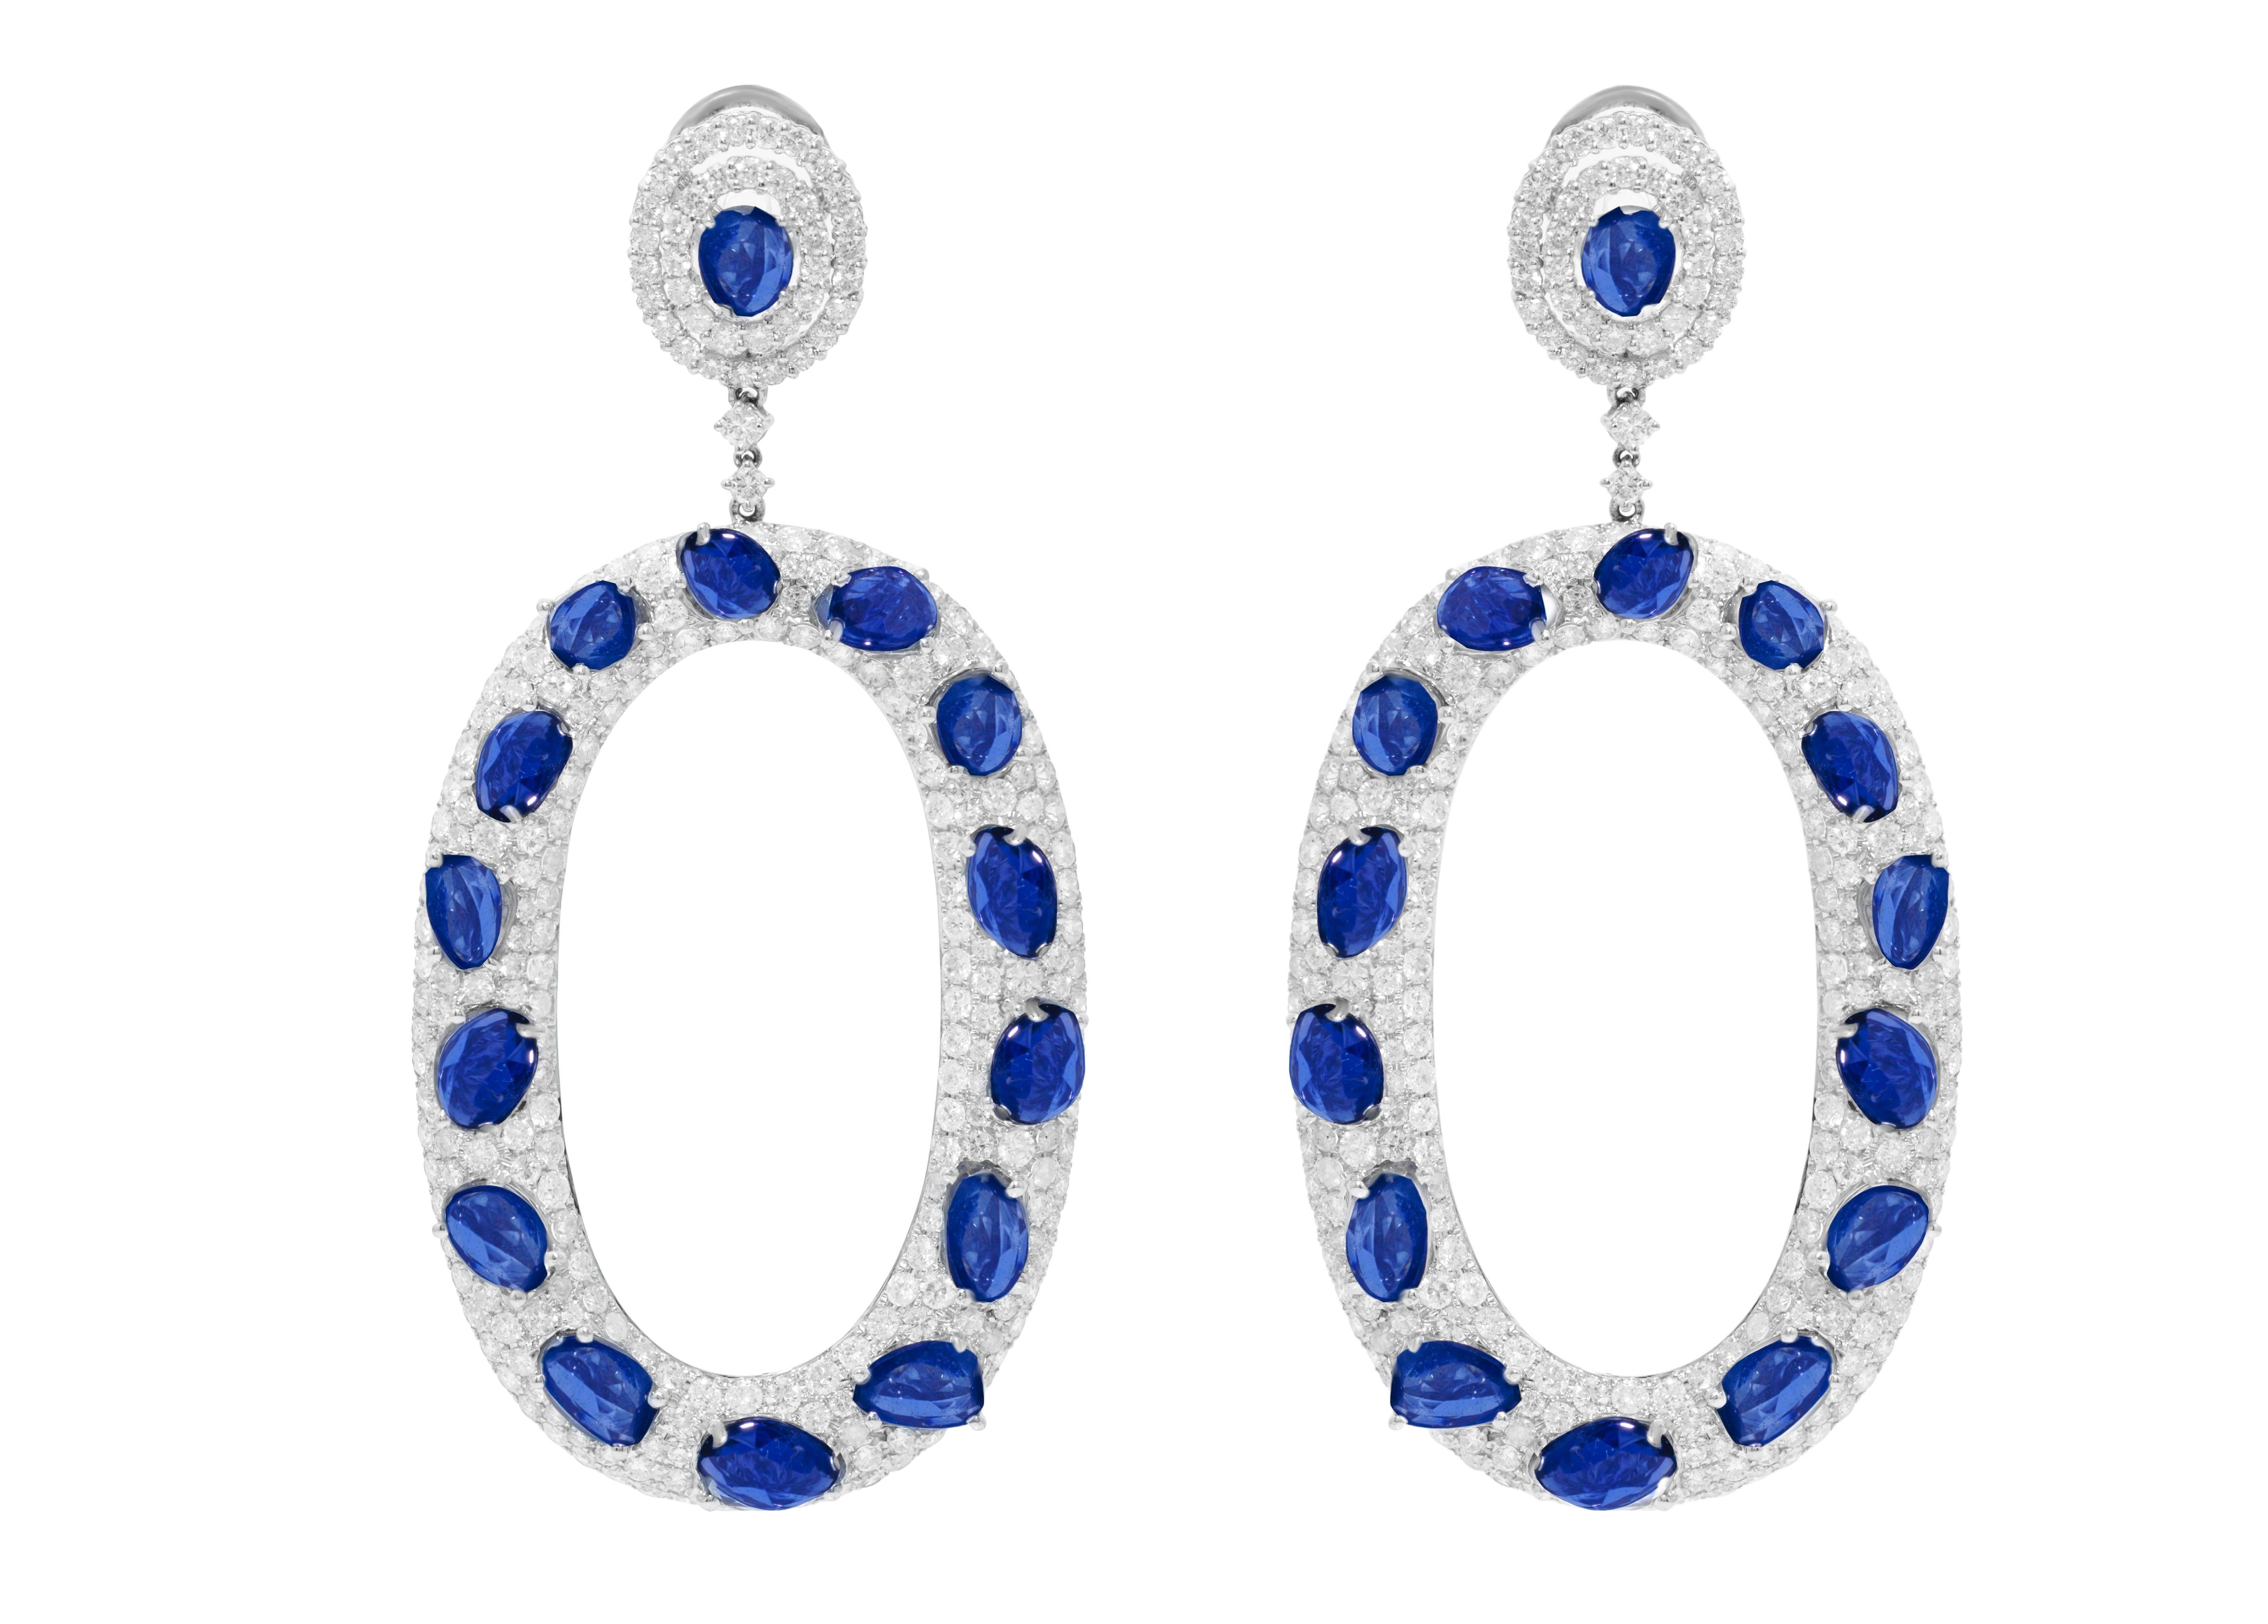 Rose Cut Diana M. 20.14 Carat Sapphire and Diamond Bagel Fashion Earrings  For Sale